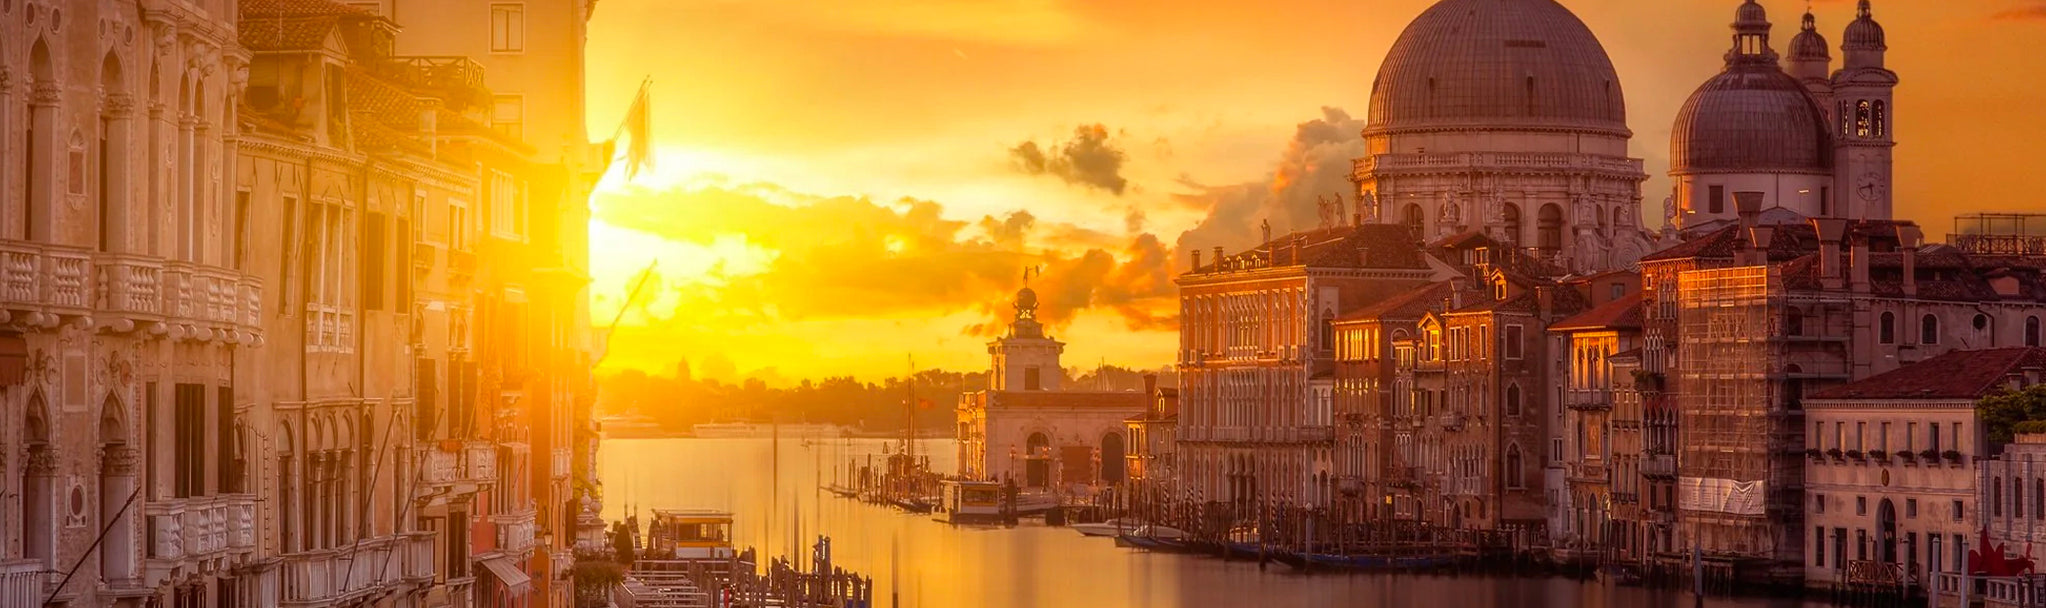 Shop The Look: Golden Hour at Venice, Italy